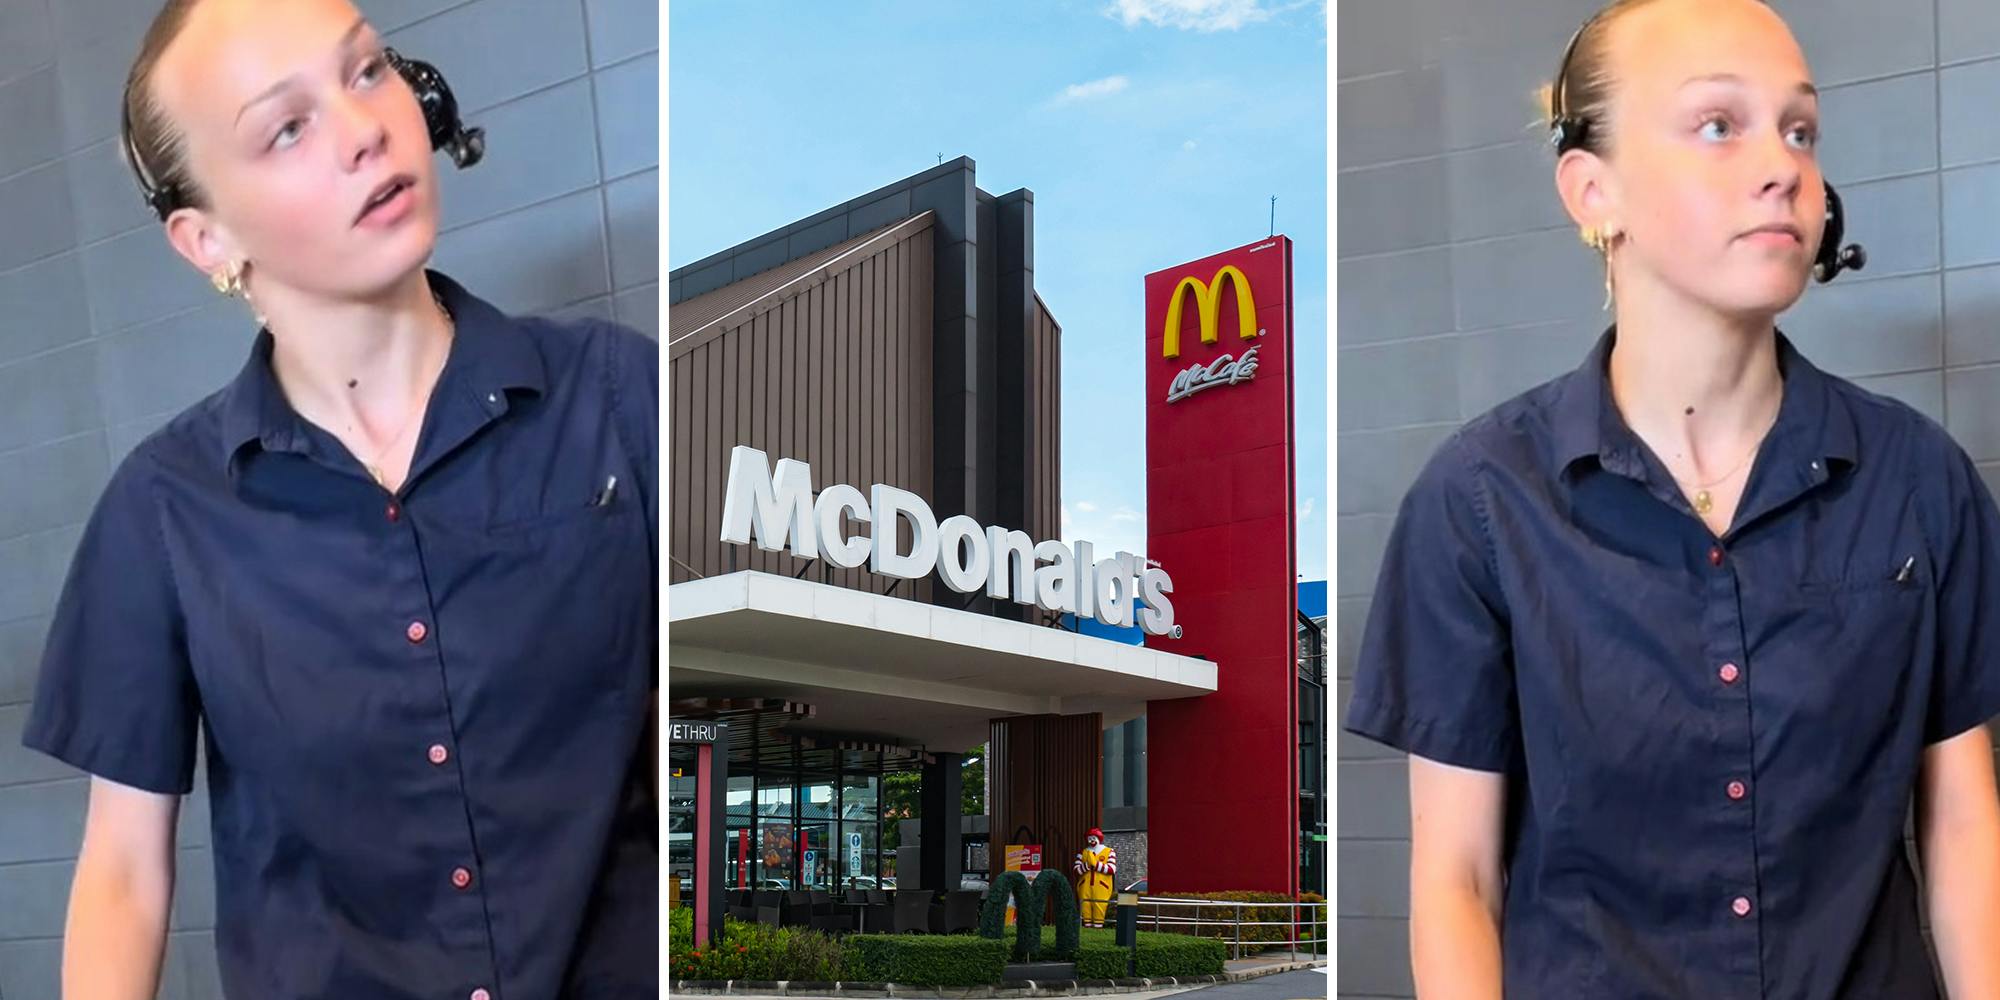 Diabetic customer says McDonalds barista lied about making drinks sugar-free